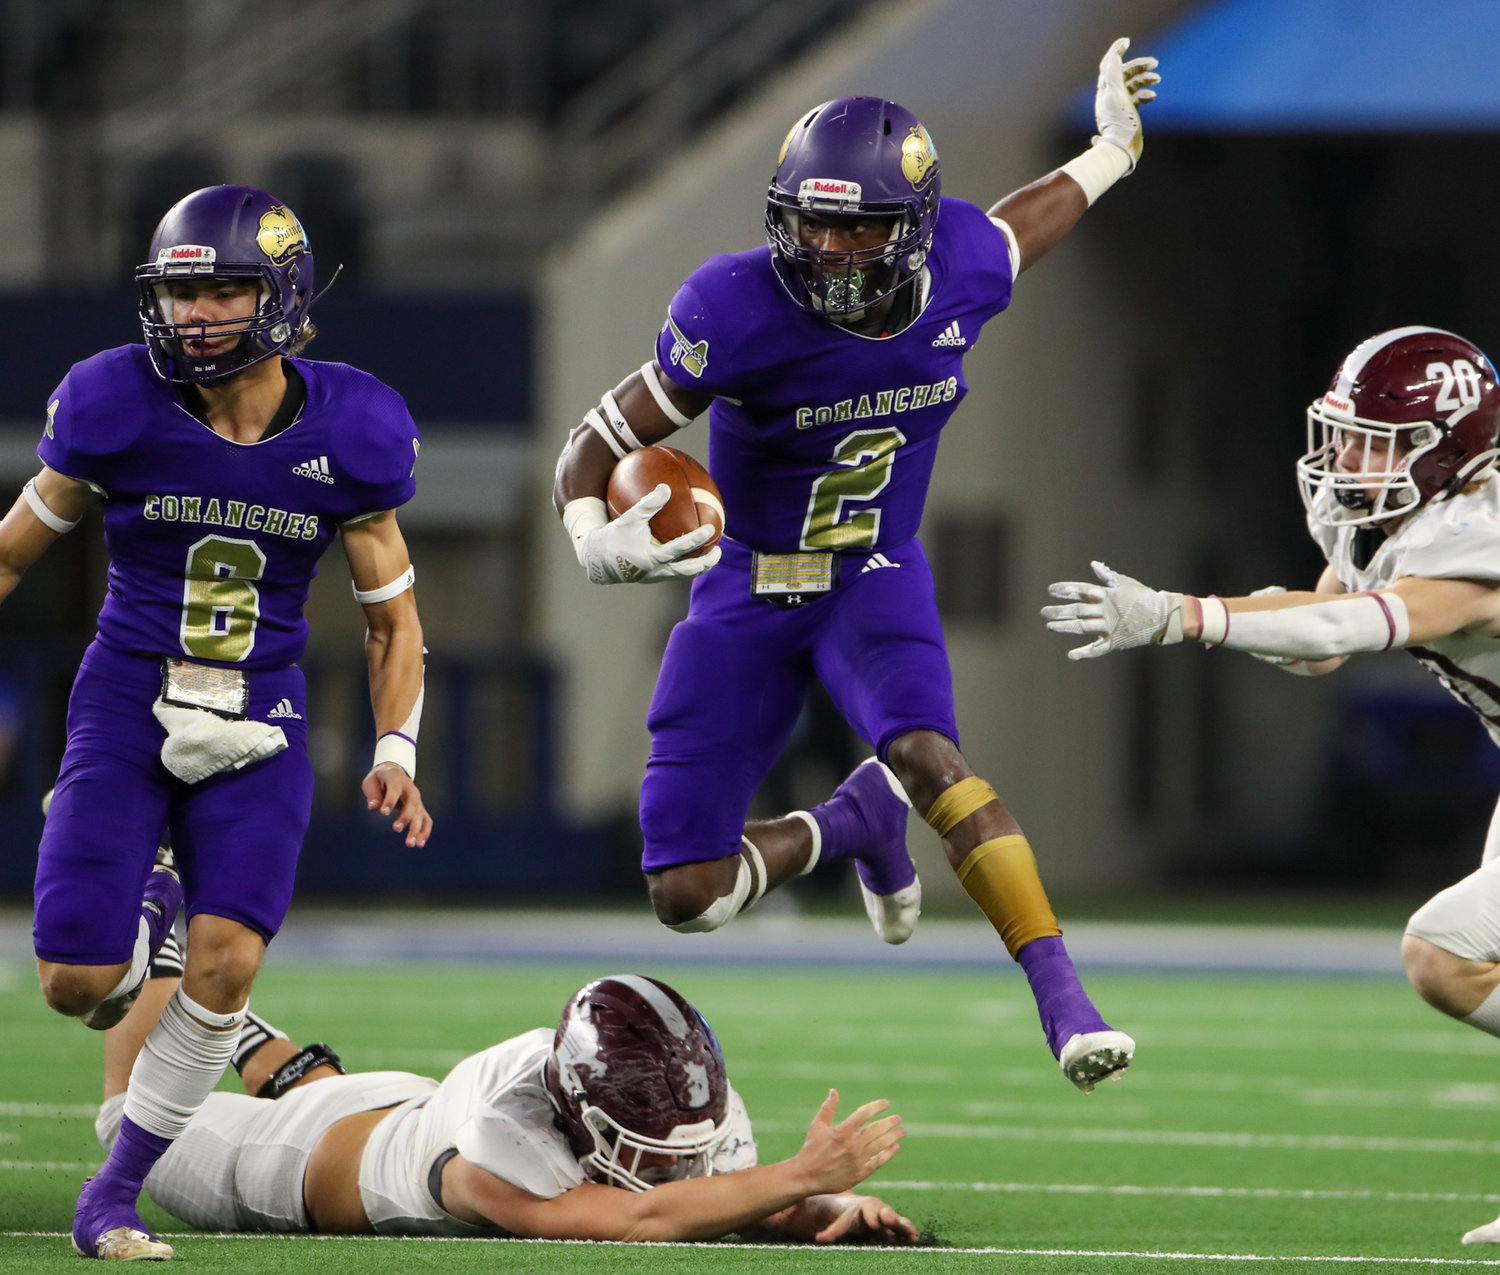 Shiner Comanches junior Dalton Brooks (2) hurdles a defender during the Class 2A Division I state football championship game between Shiner and Hawley on December 15, 2021 in Arlington, Texas.